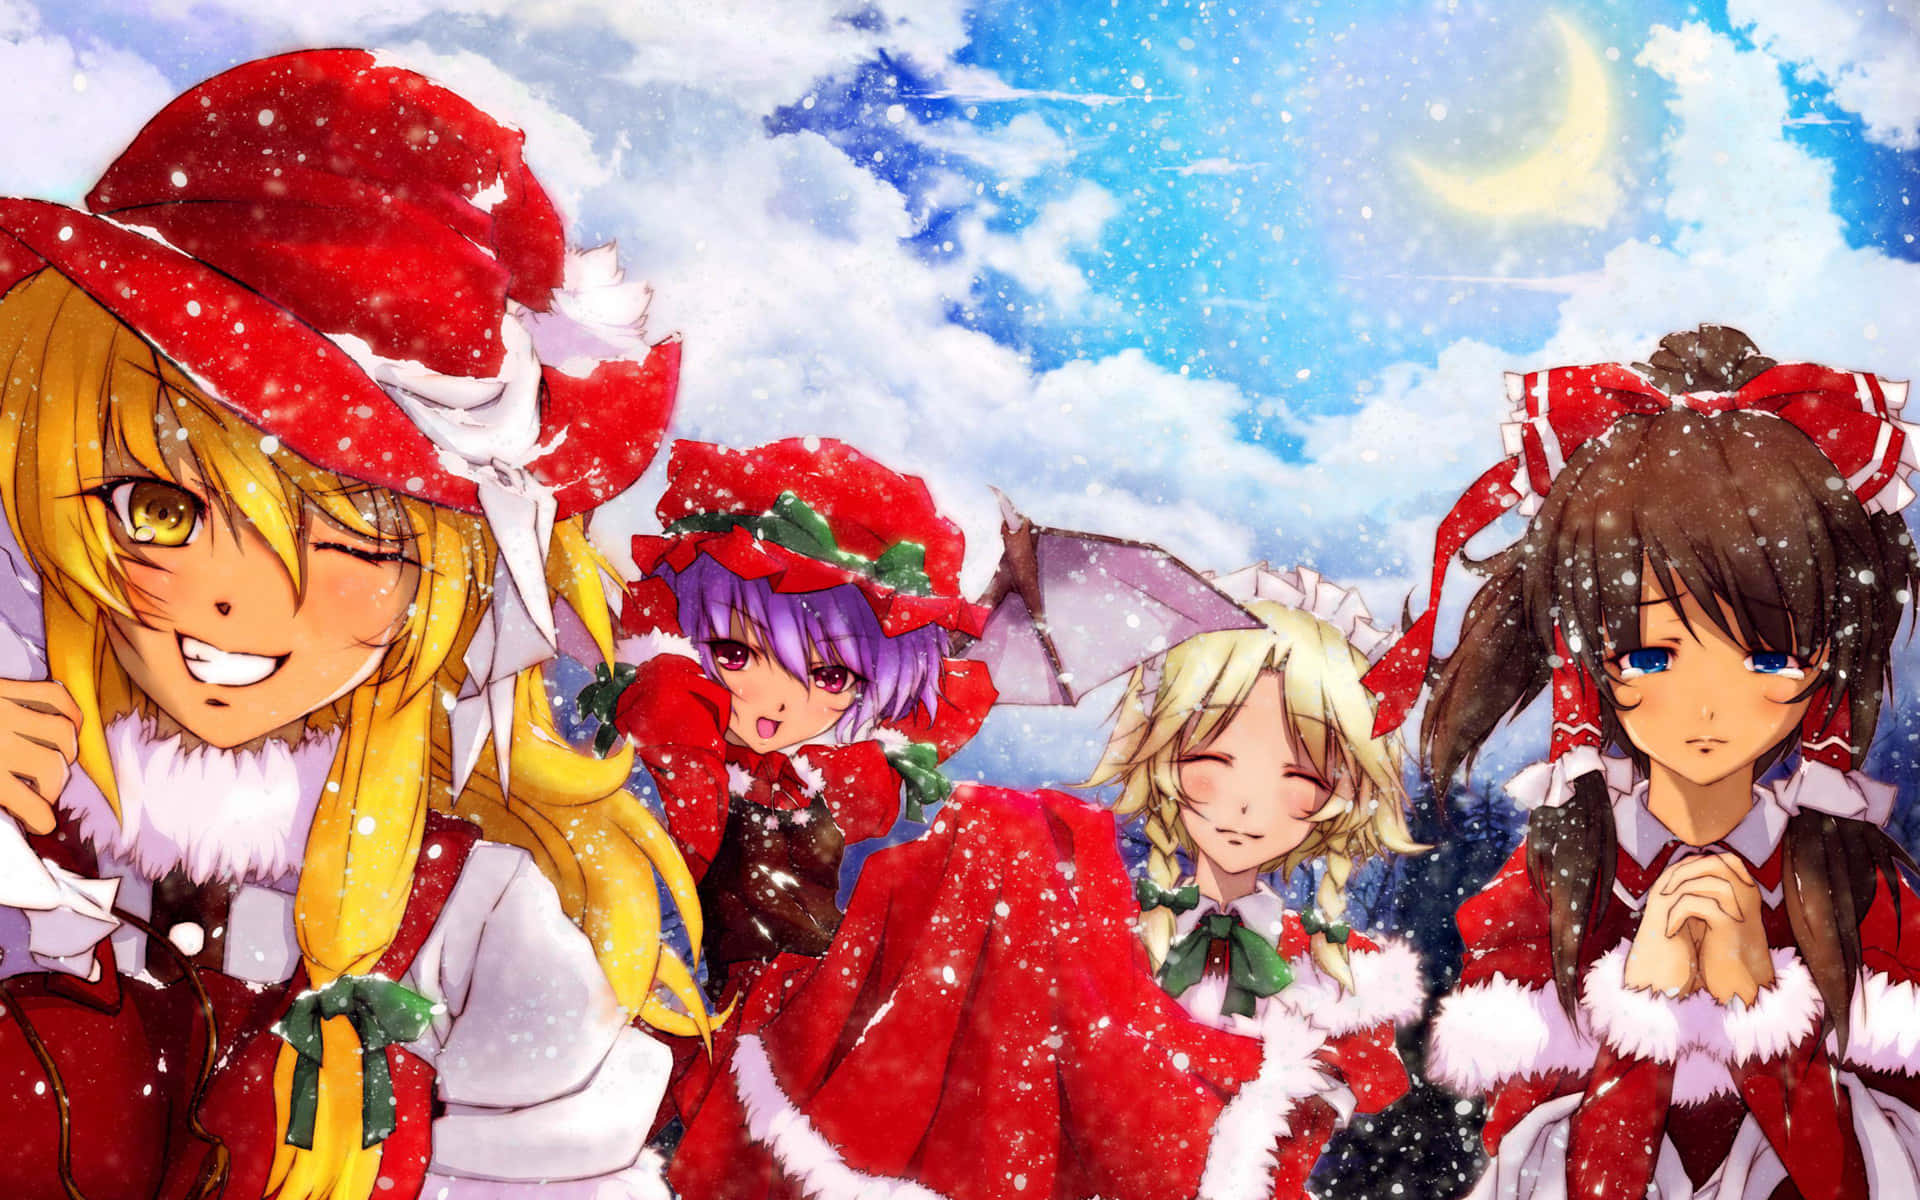 Celebrate the holidays with this festive Anime Christmas background!